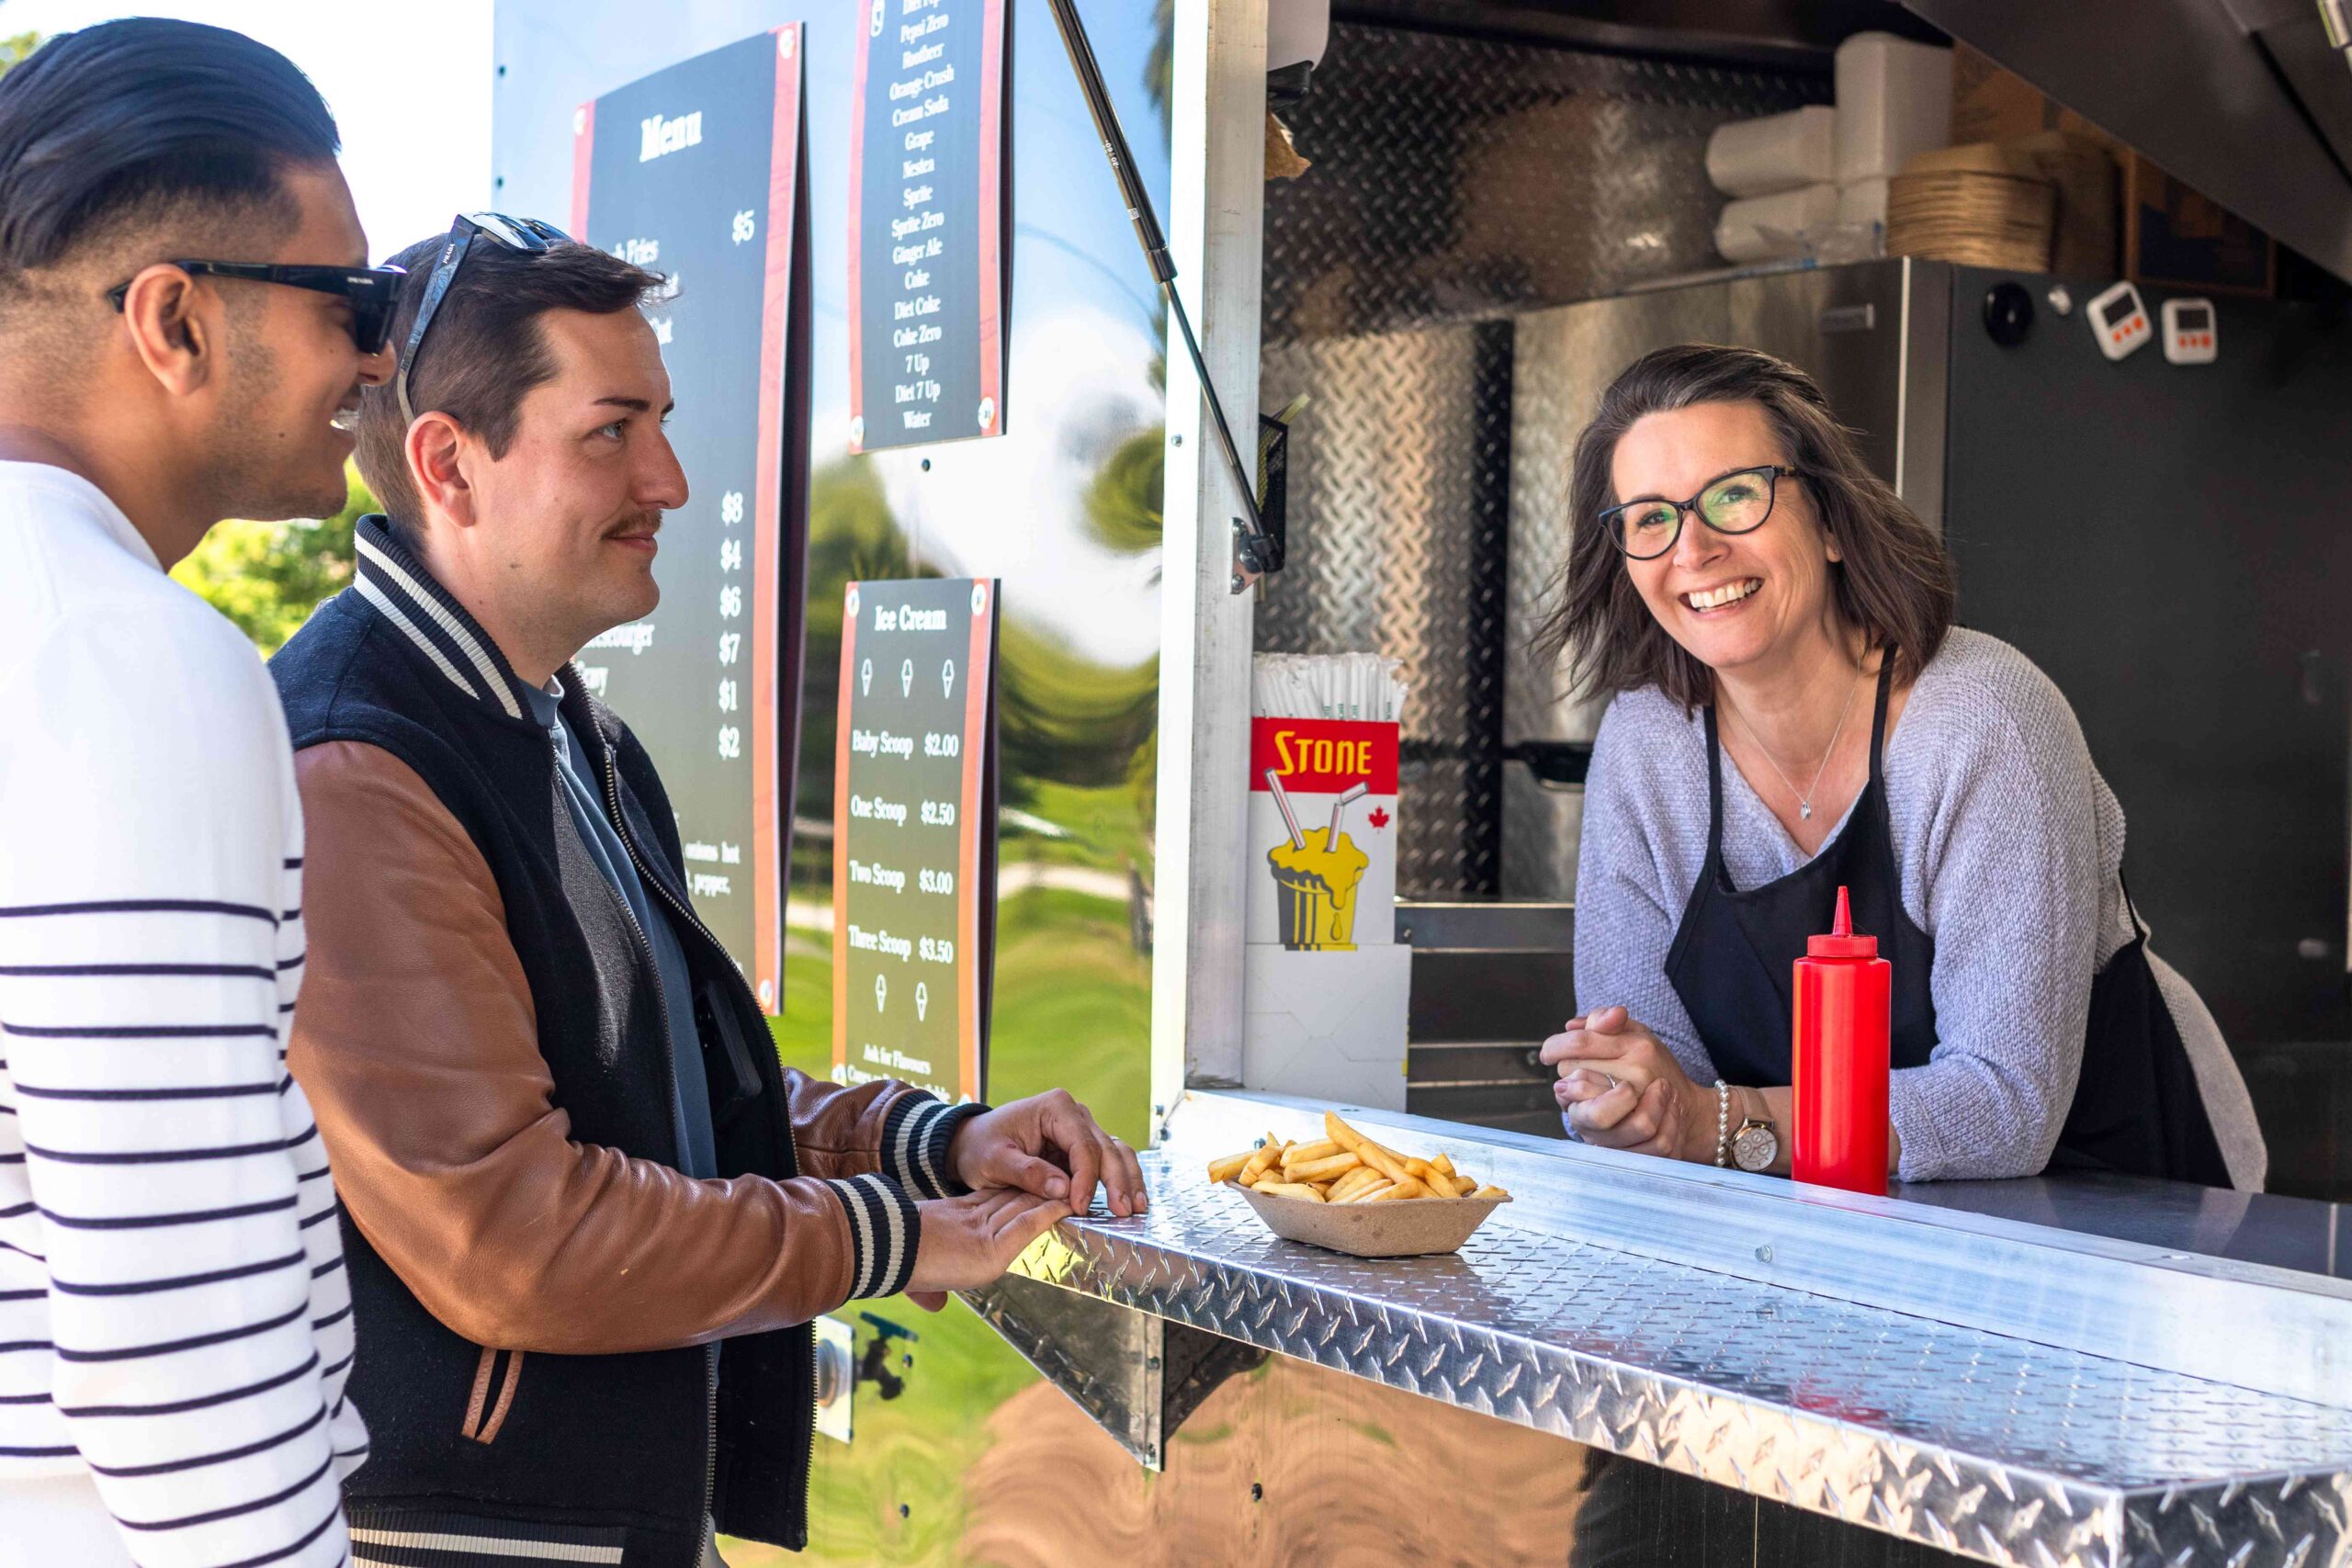 A woman smiles from a food truck service window while serving two customers.